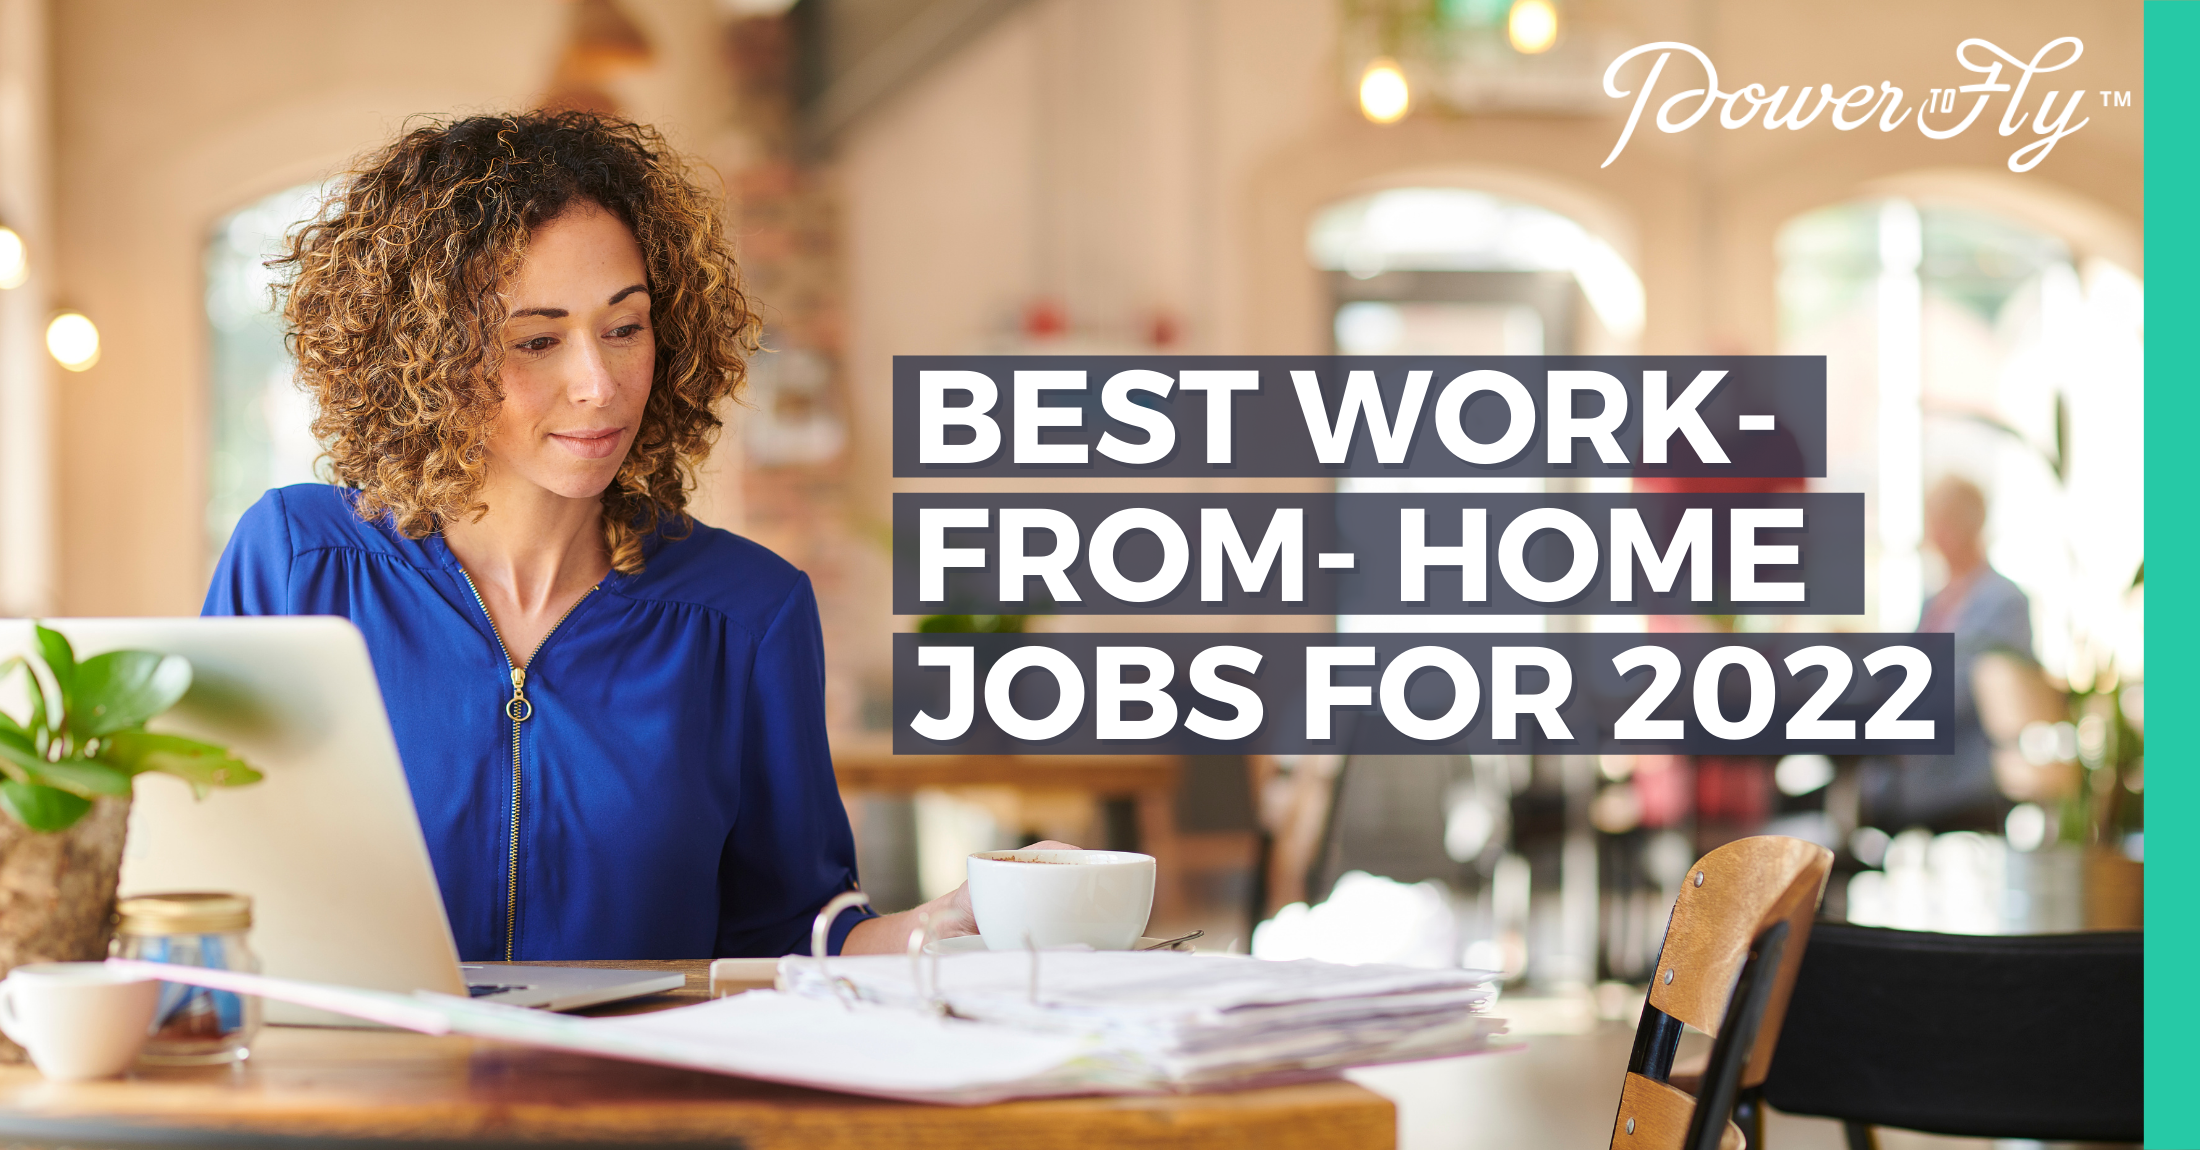 Best Jobs 2022: The Top Gigs Based on Pay, Openings and More   Money